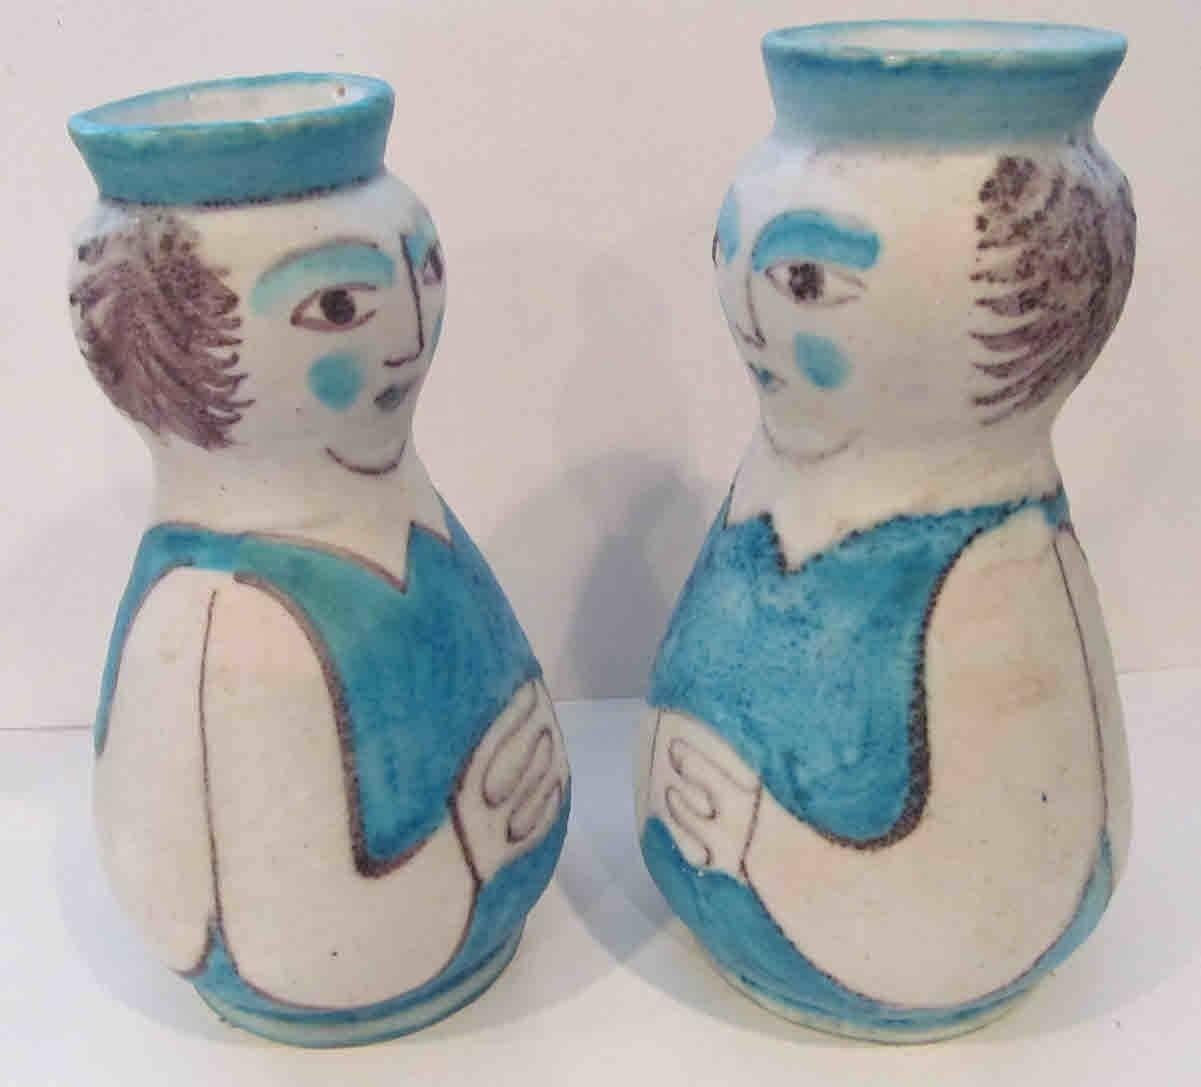 A rare pair of CAS pottery vases from Italy, circa 1950s.